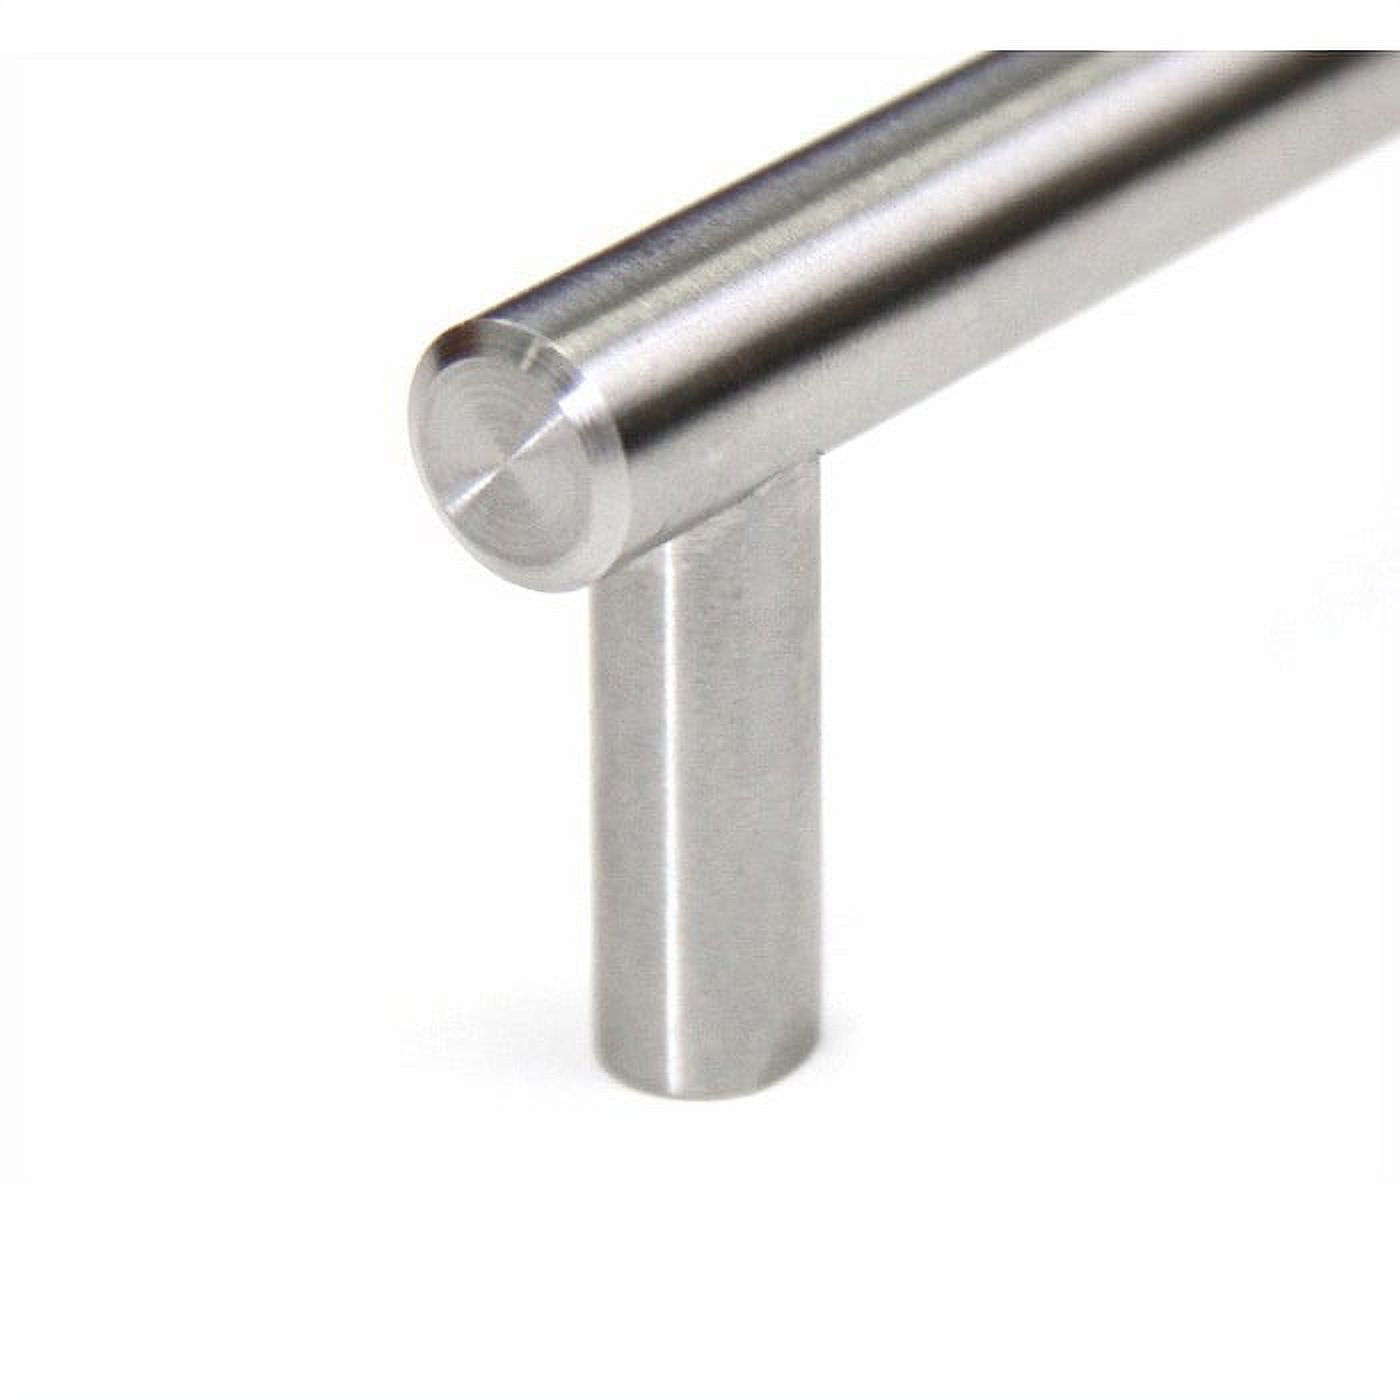 8" Solid Stainless Steel Cabinet Bar Pull Handles Stainless Steel 8-inch Cabinet Bar Pull Handles (Case of 15) - image 3 of 3